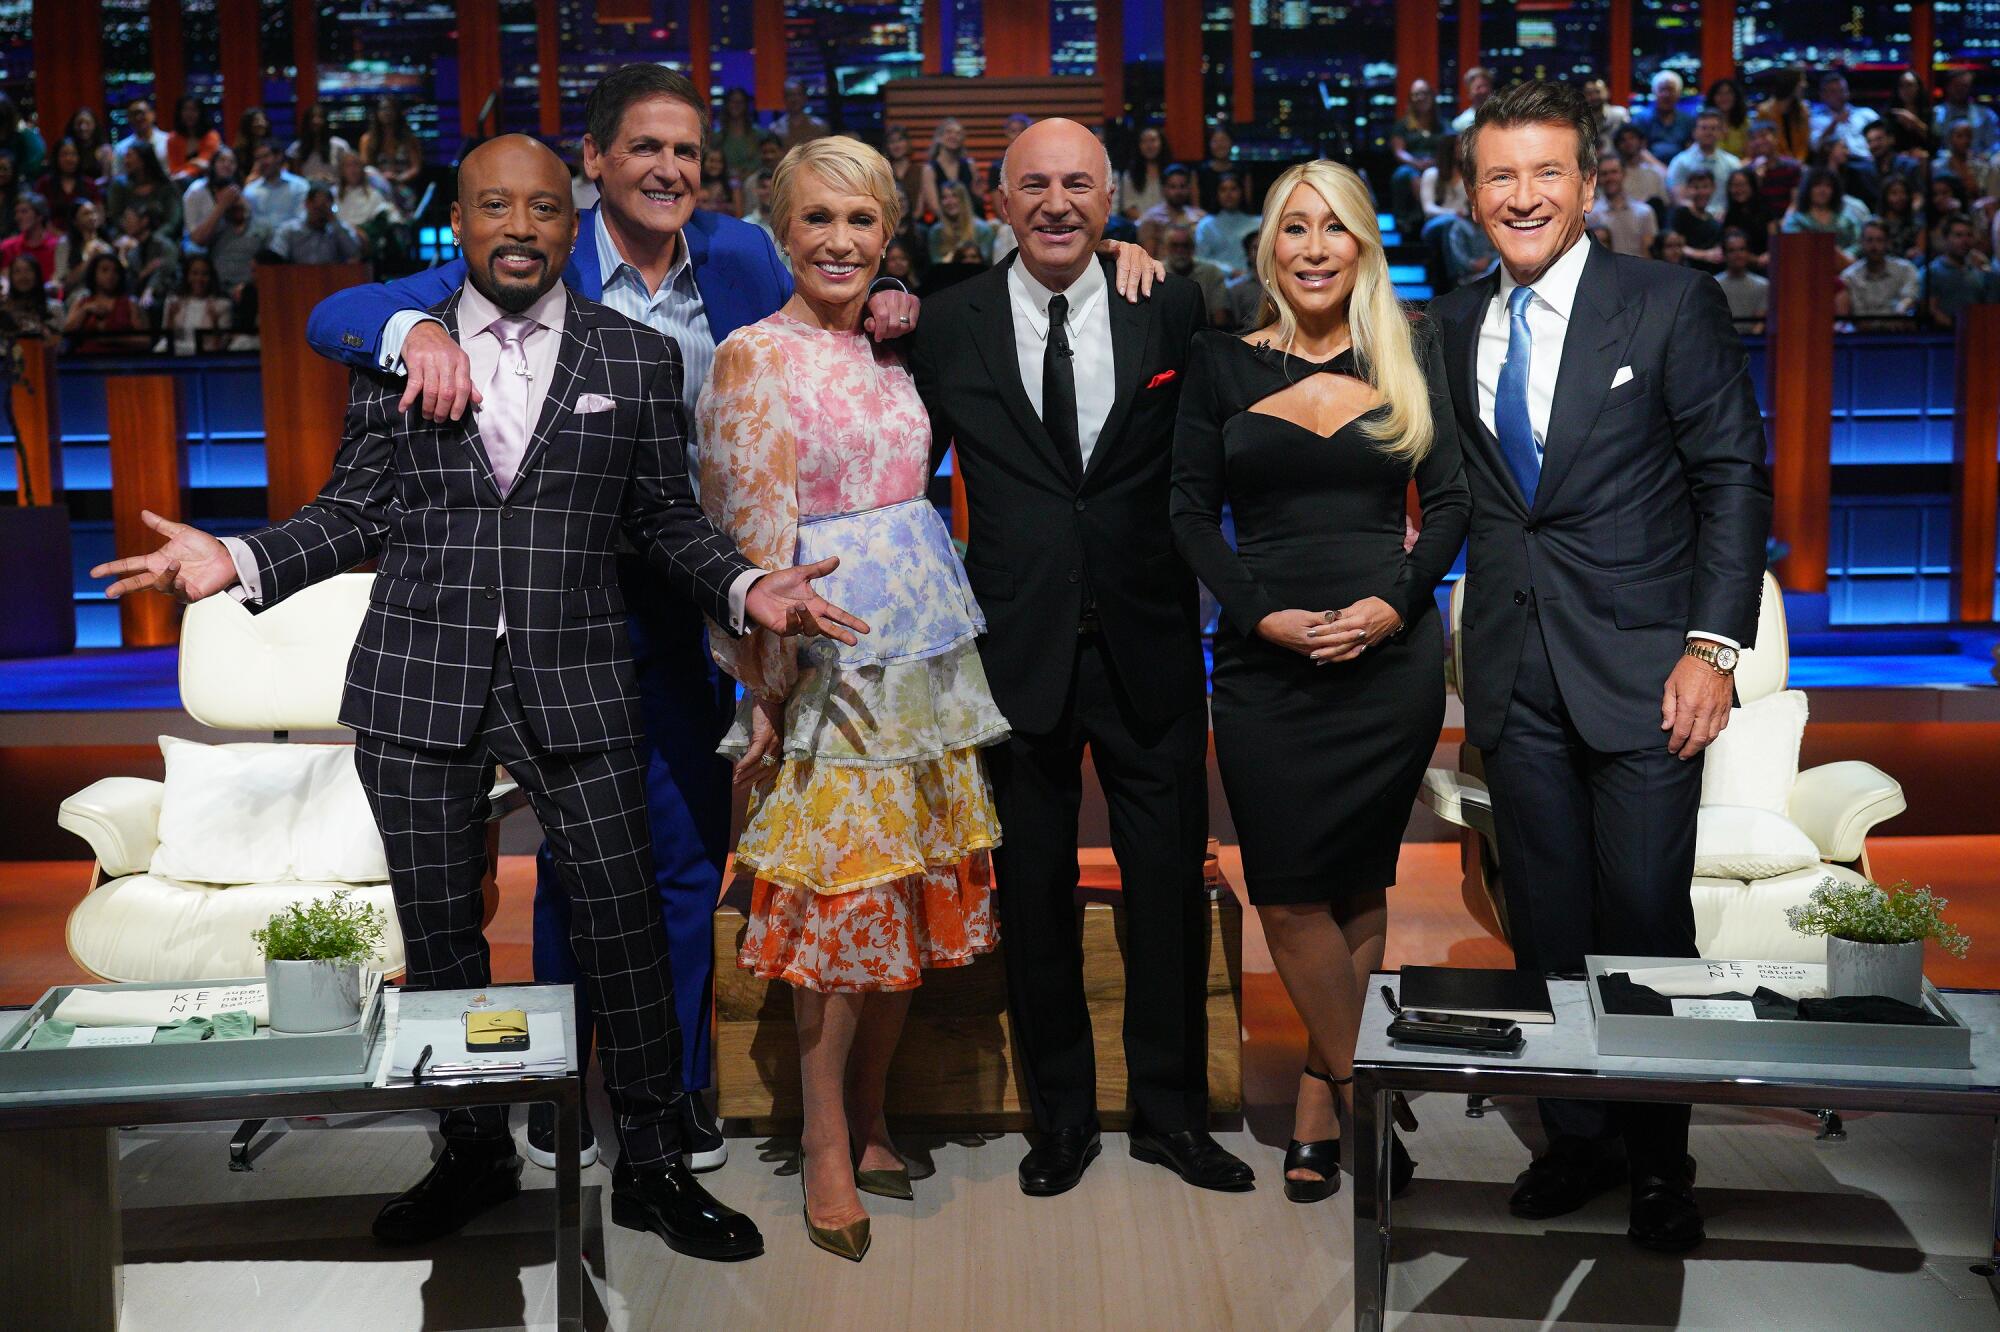 Six celebrity panelists in dress attire smiling for a group photo on set